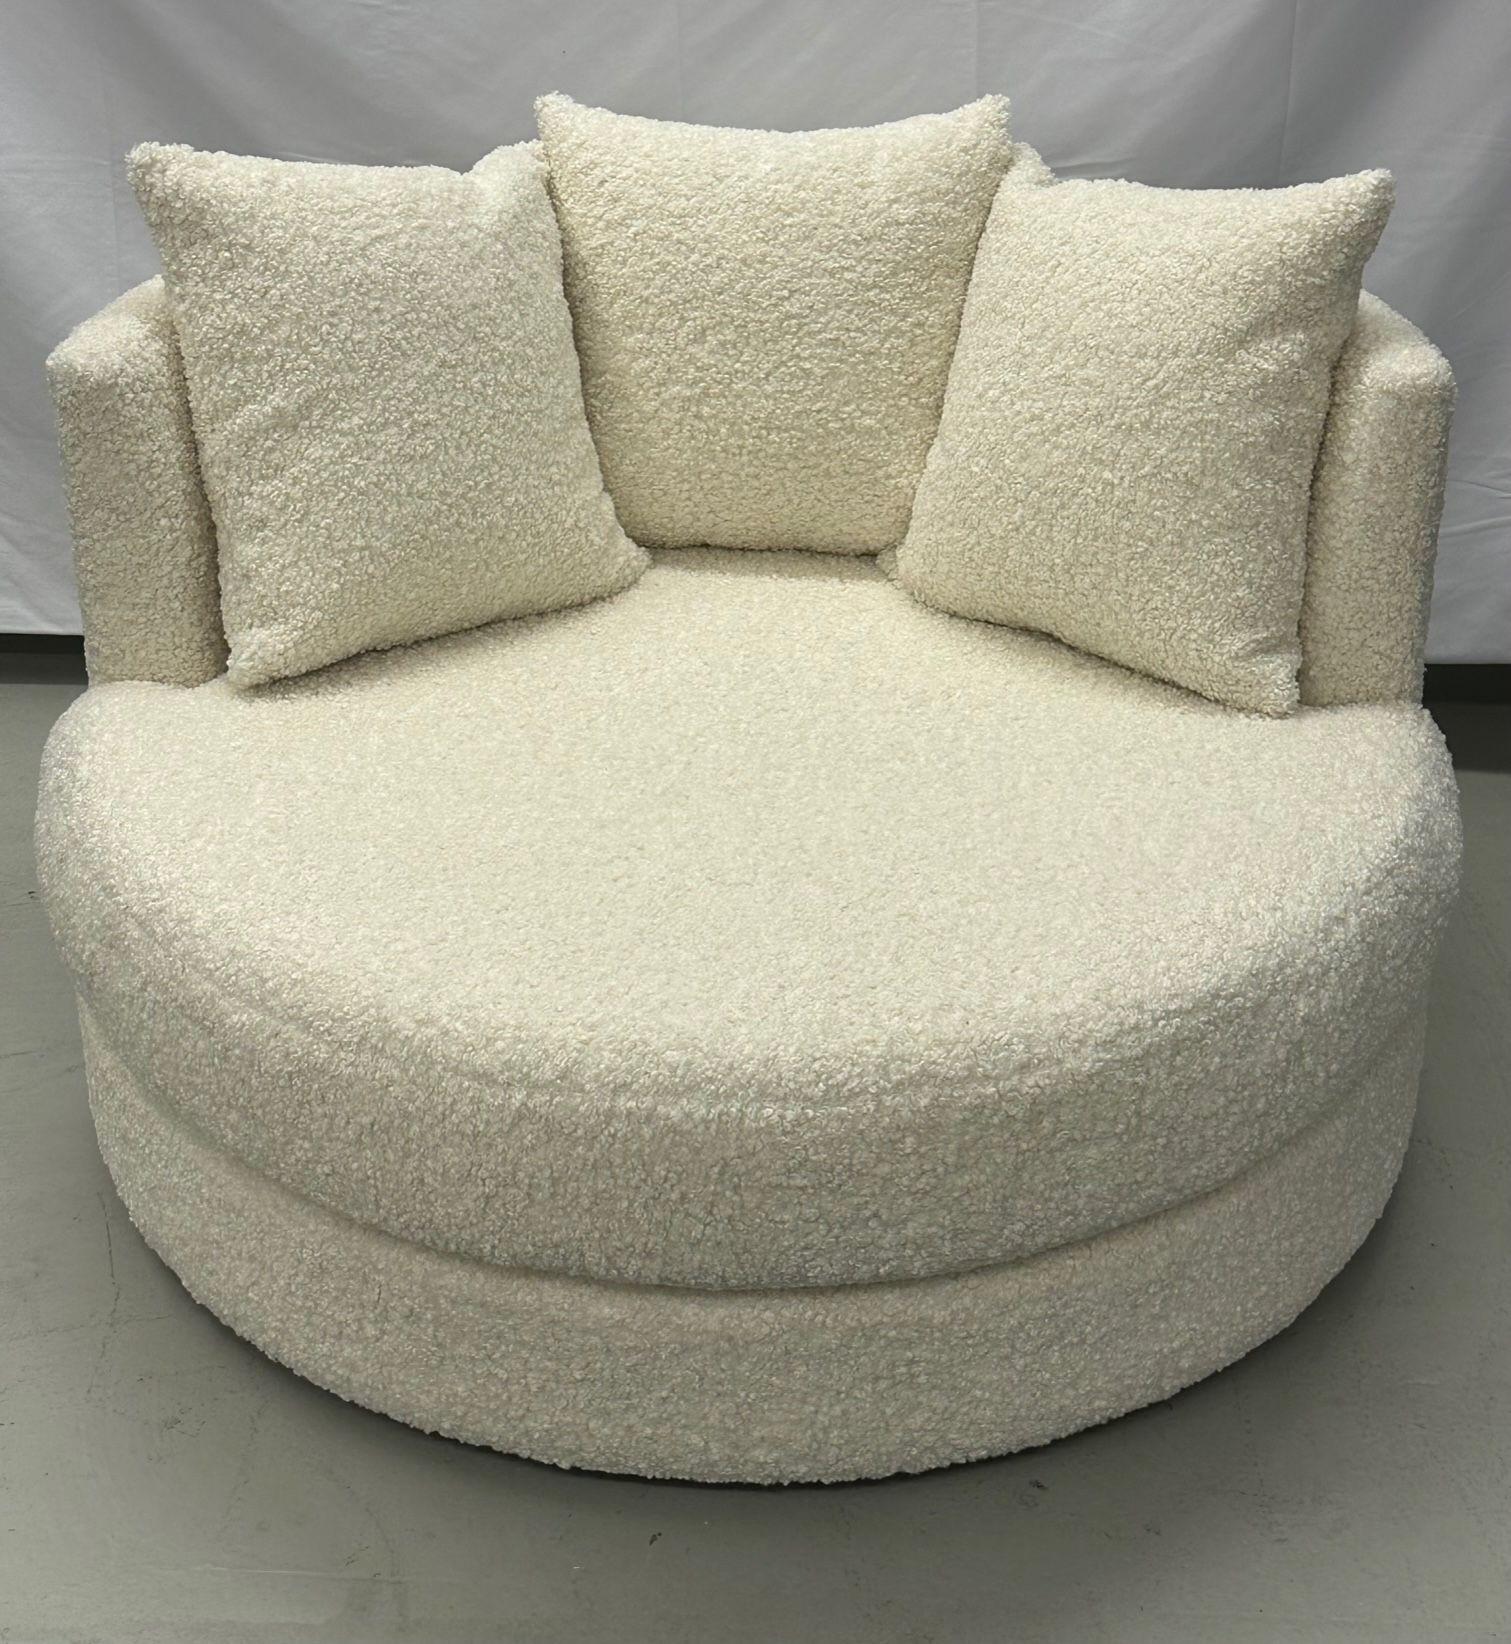 Mid-Century Modern style oversized white boucle swivel / lounge chair
 
Measures: 29.5 height x 50 diameter / SH 18